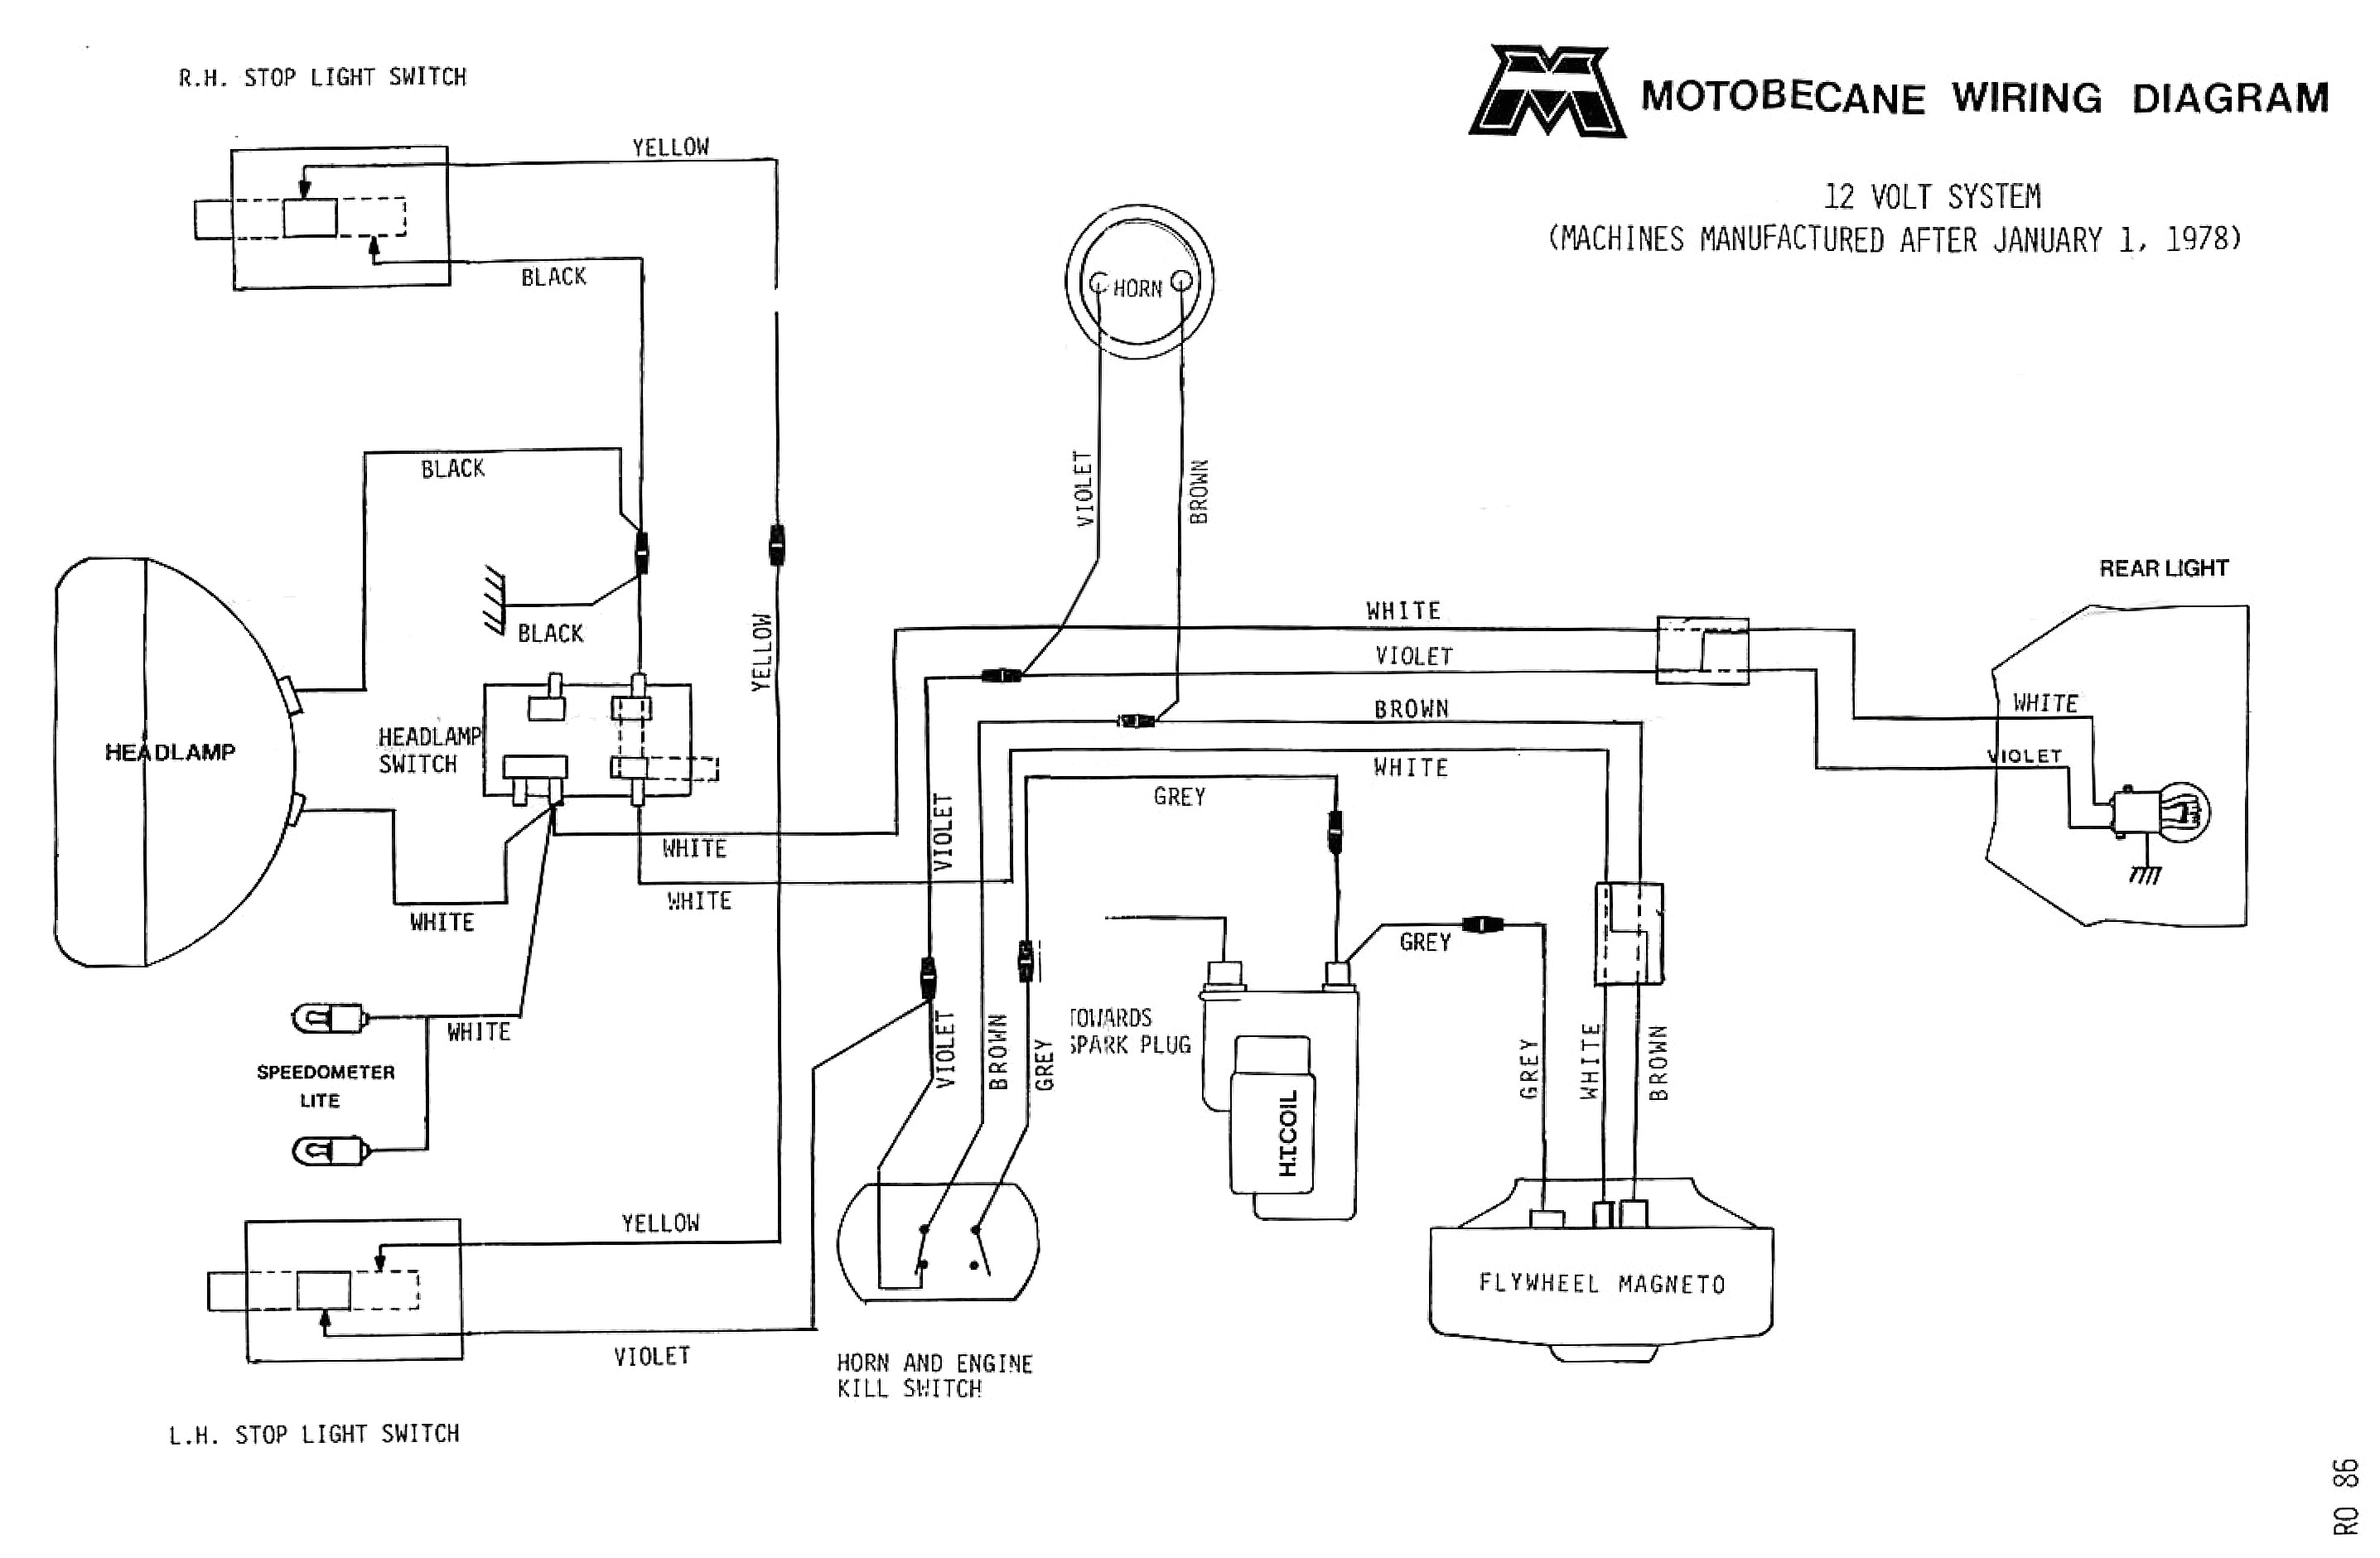 8n ford tractor wiring diagram 6 volt new ford 8n distributor diagram fresh ford tractor 12 volt conversion of 8n ford tractor wiring diagram 6 volt jpg